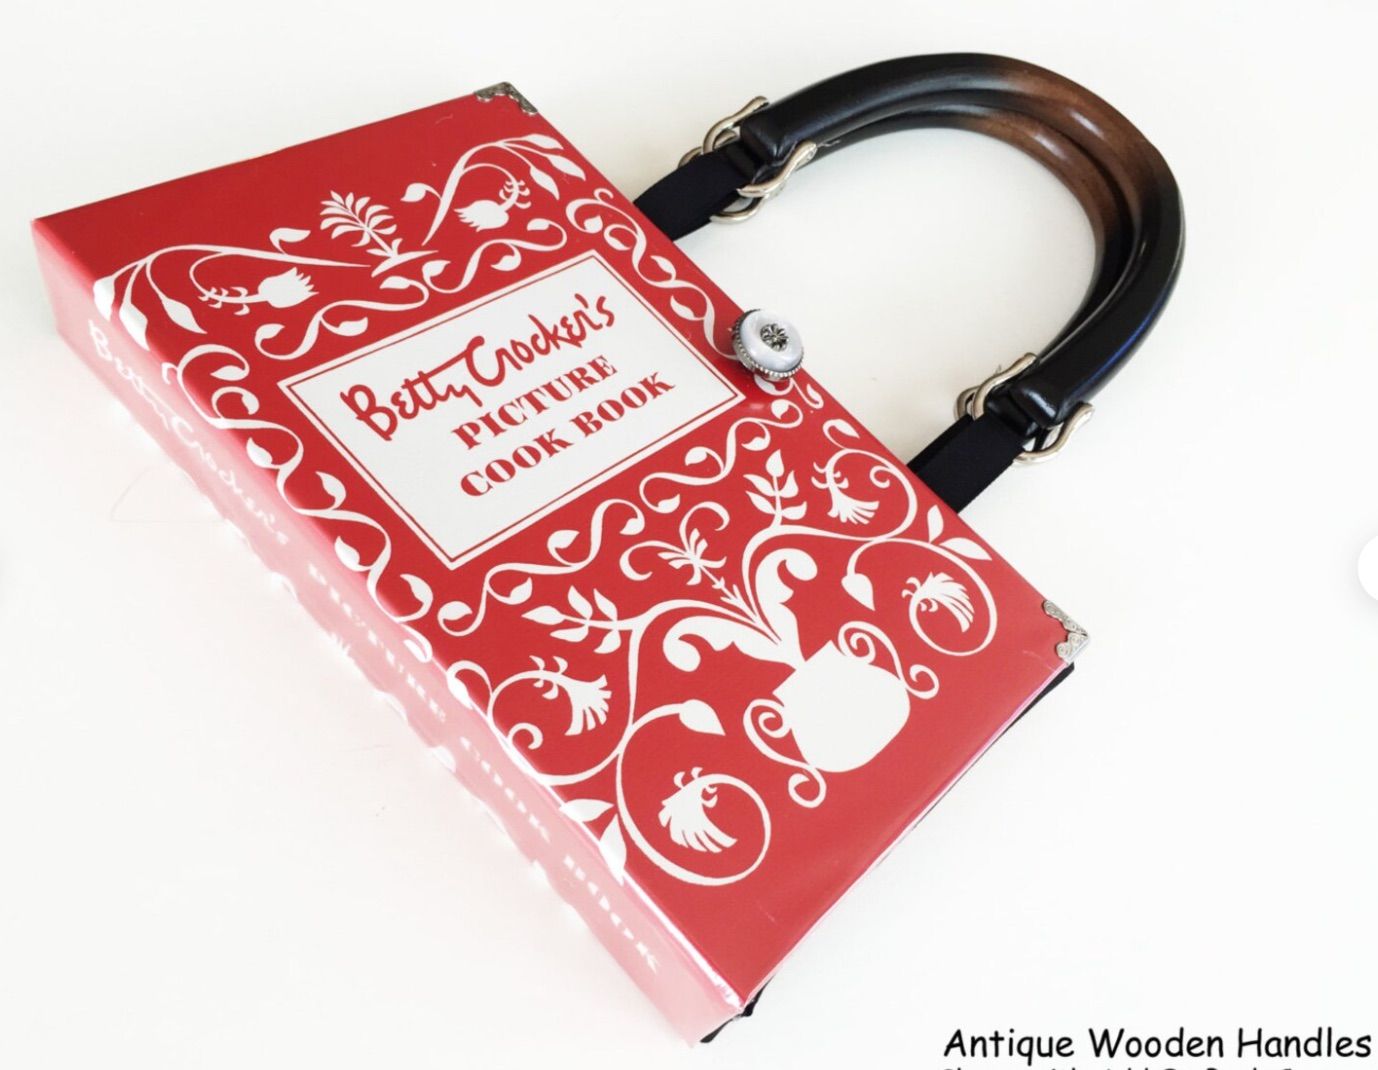 Image of red betty crocker picture cookbook made into a purse with antique wooden handles.